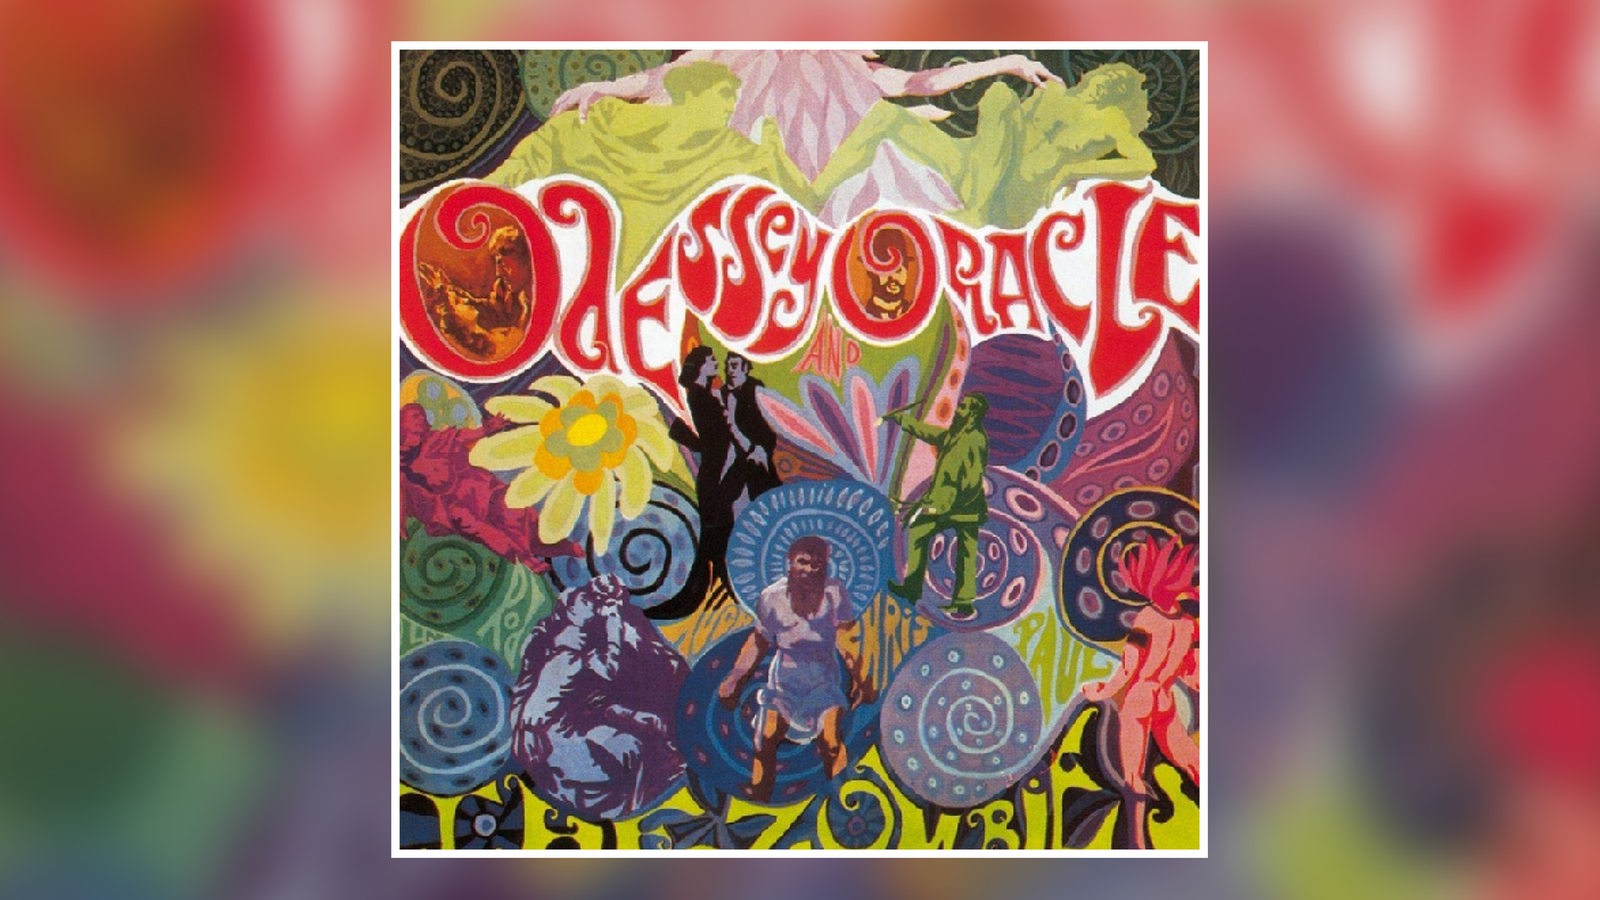 Das Cover des Albums "Odessey and Oracle"